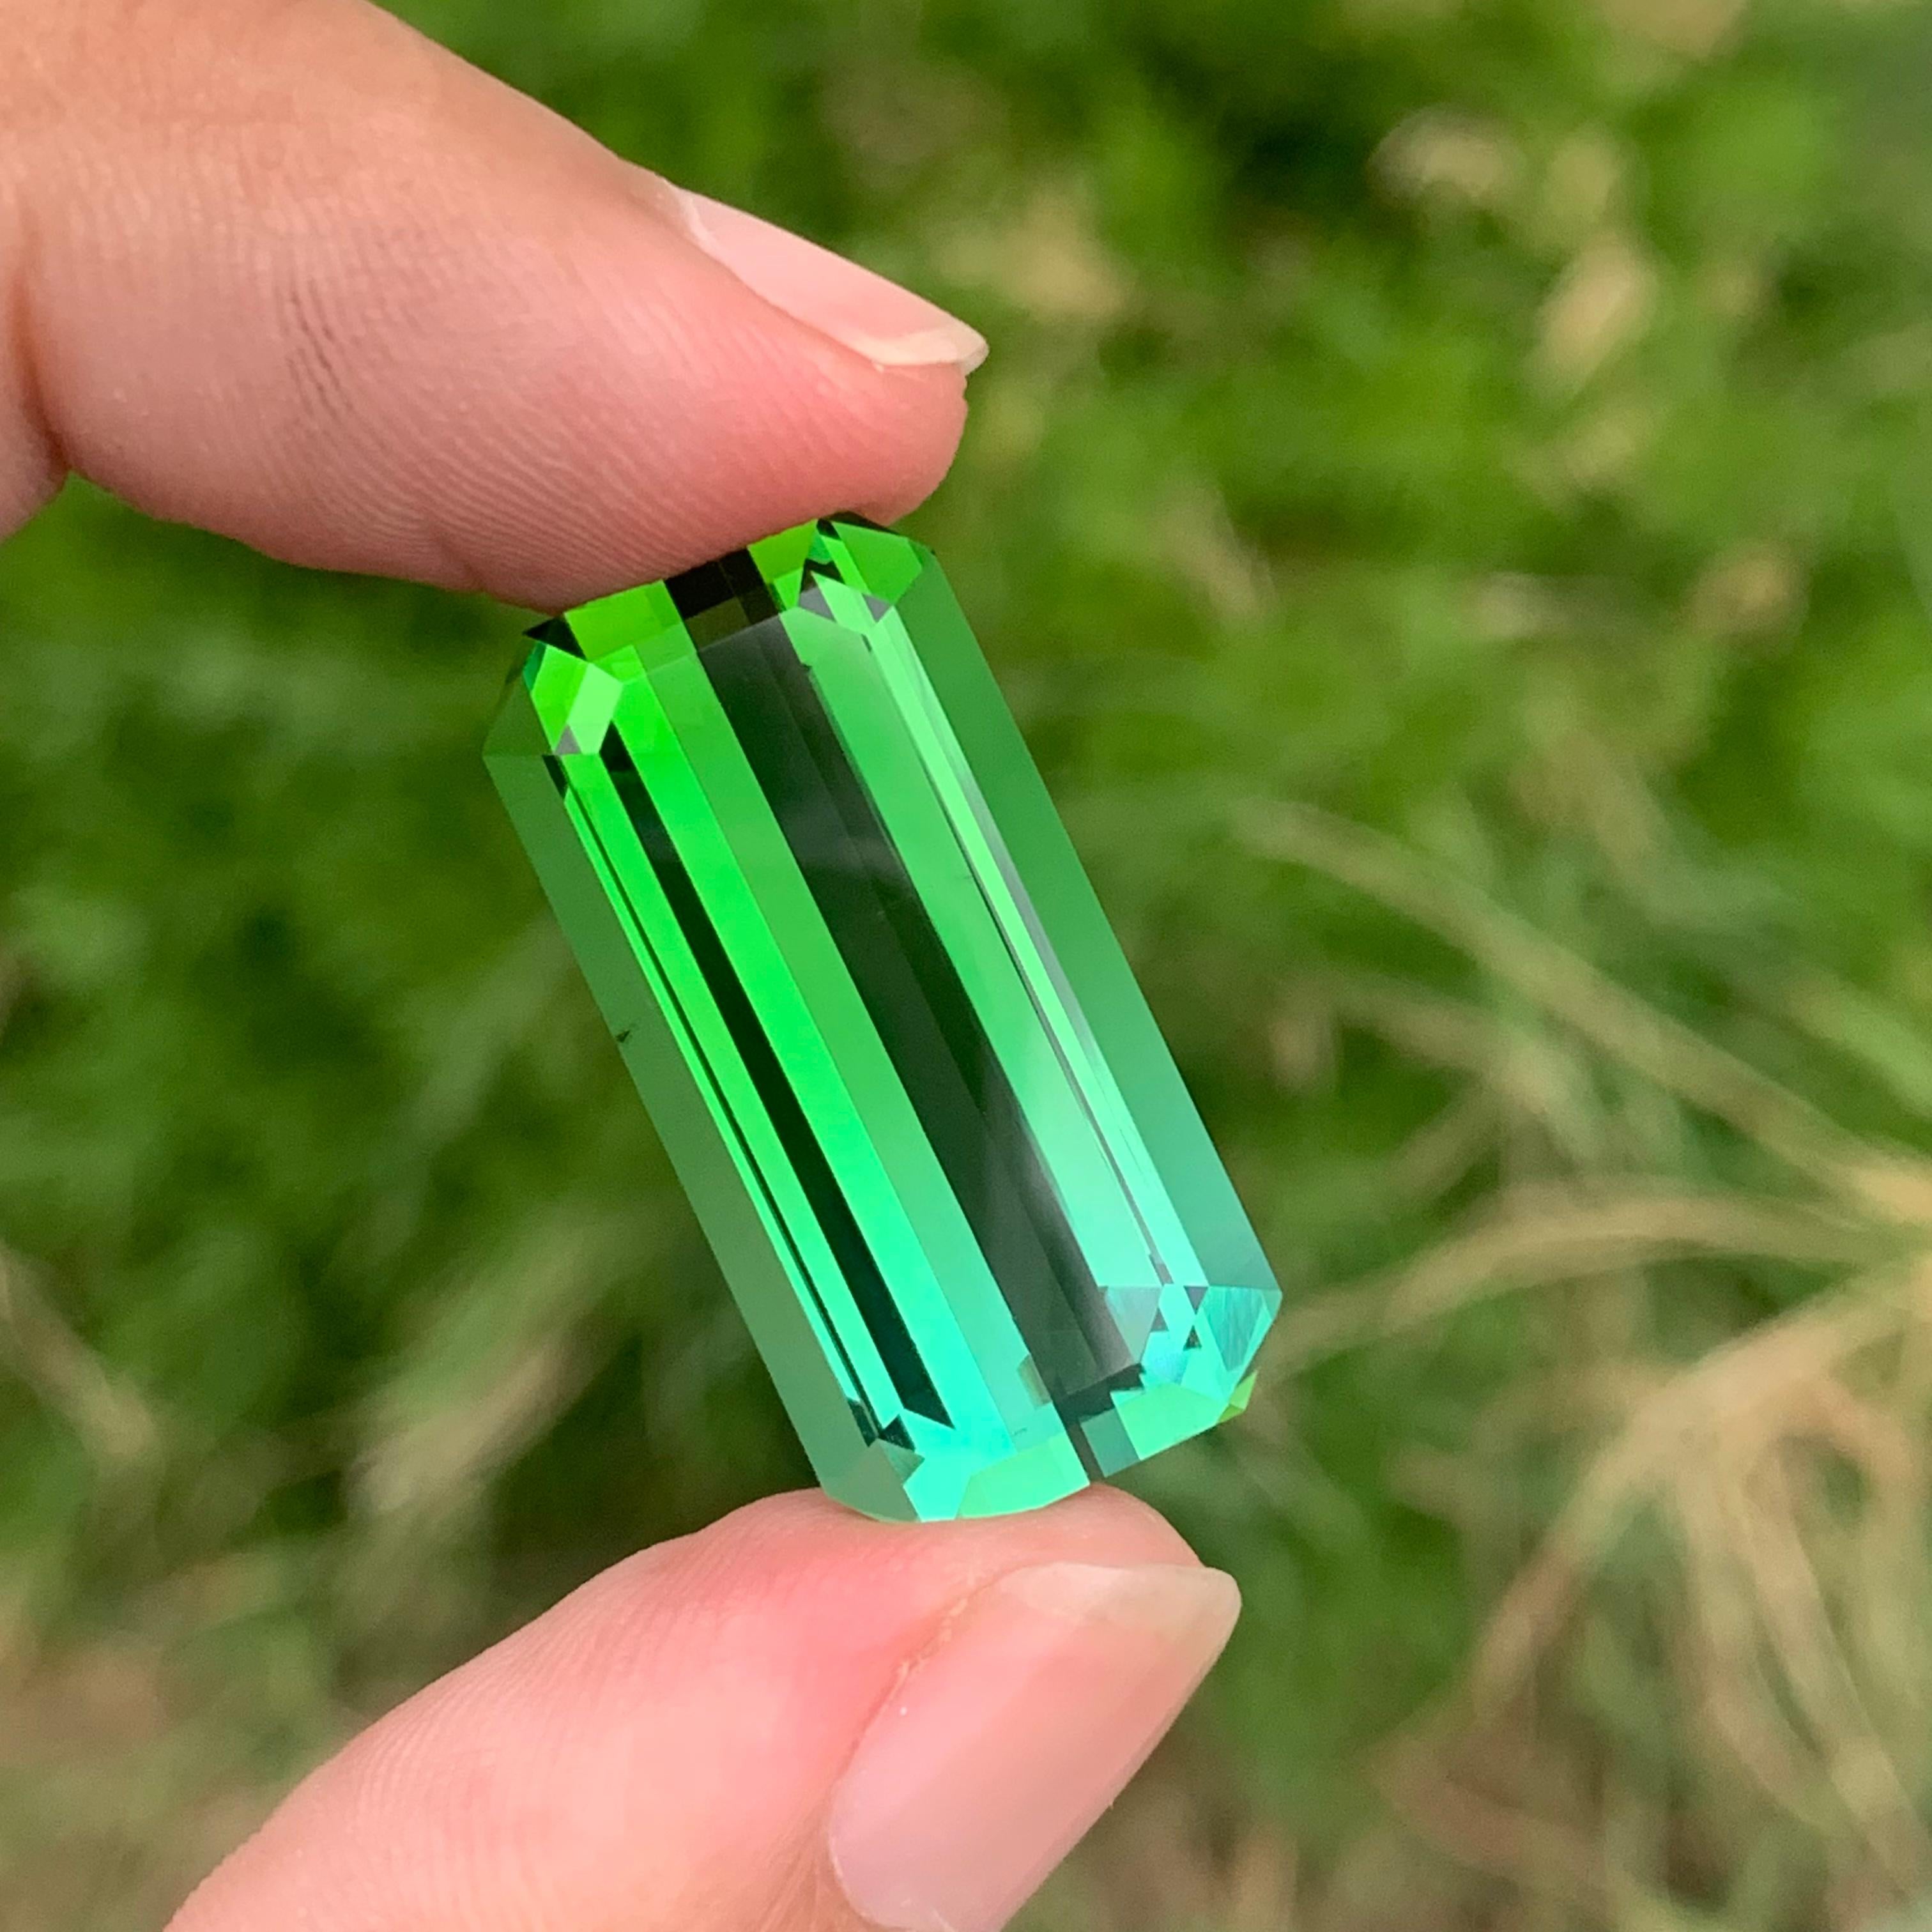 Faceted Bicolour Tourmaline 
Weight: 28.75 Carats
Dimension:27x14x8.9 Mm
Origin: Afghanistan
Color: Bicolor Blue Green
Treatment: Non
Shape: Emerald 
Certificate: on customer demand 
.
Bicolour tourmaline, a captivating and exquisite gemstone, is